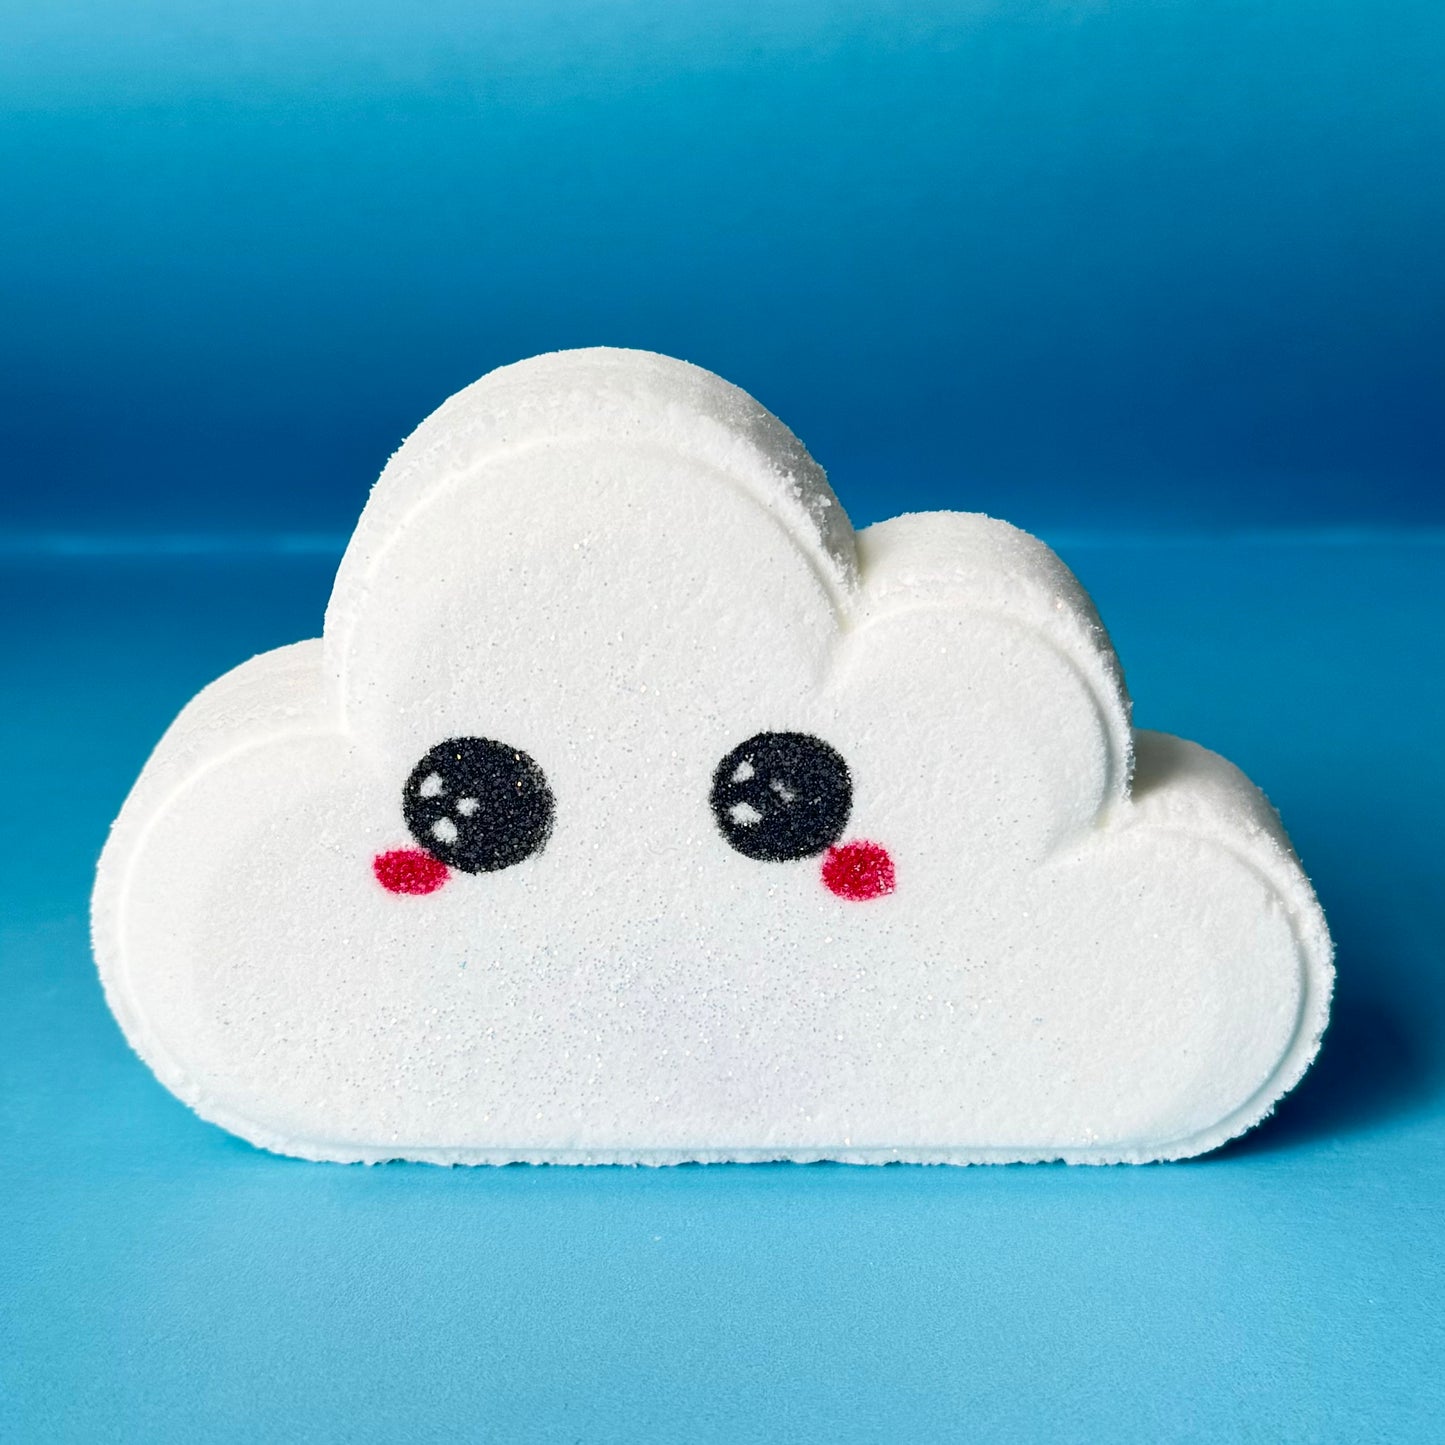 Cloud shaped bath bomb, with cute eyes and rosey cheeks, hand painted on face. 